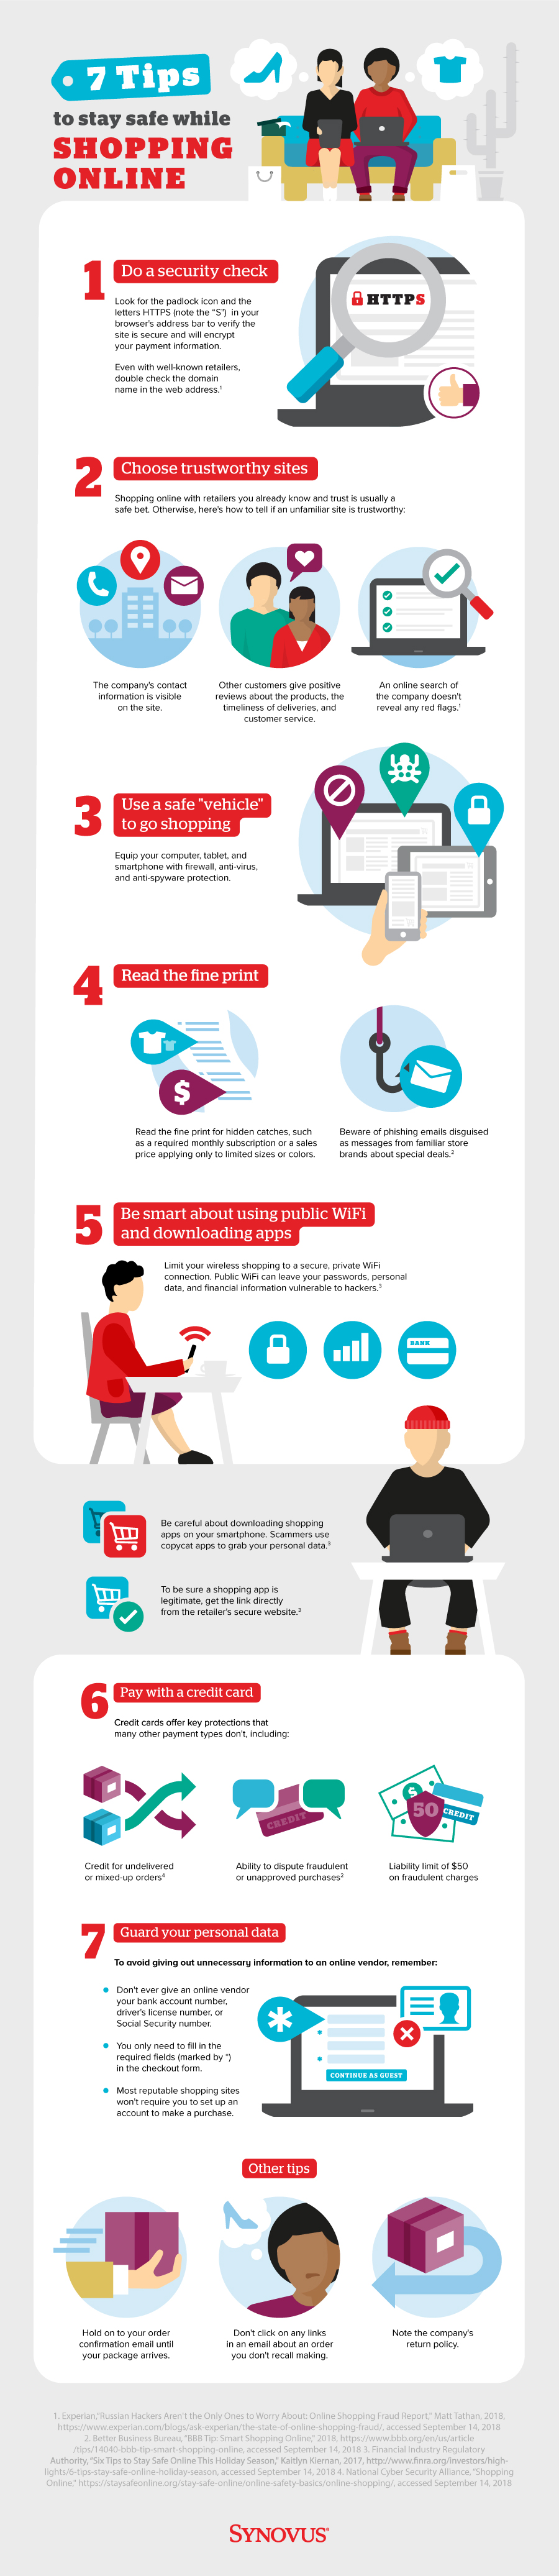 Infographic: 7 Tips Safe While Shopping Online Synovus